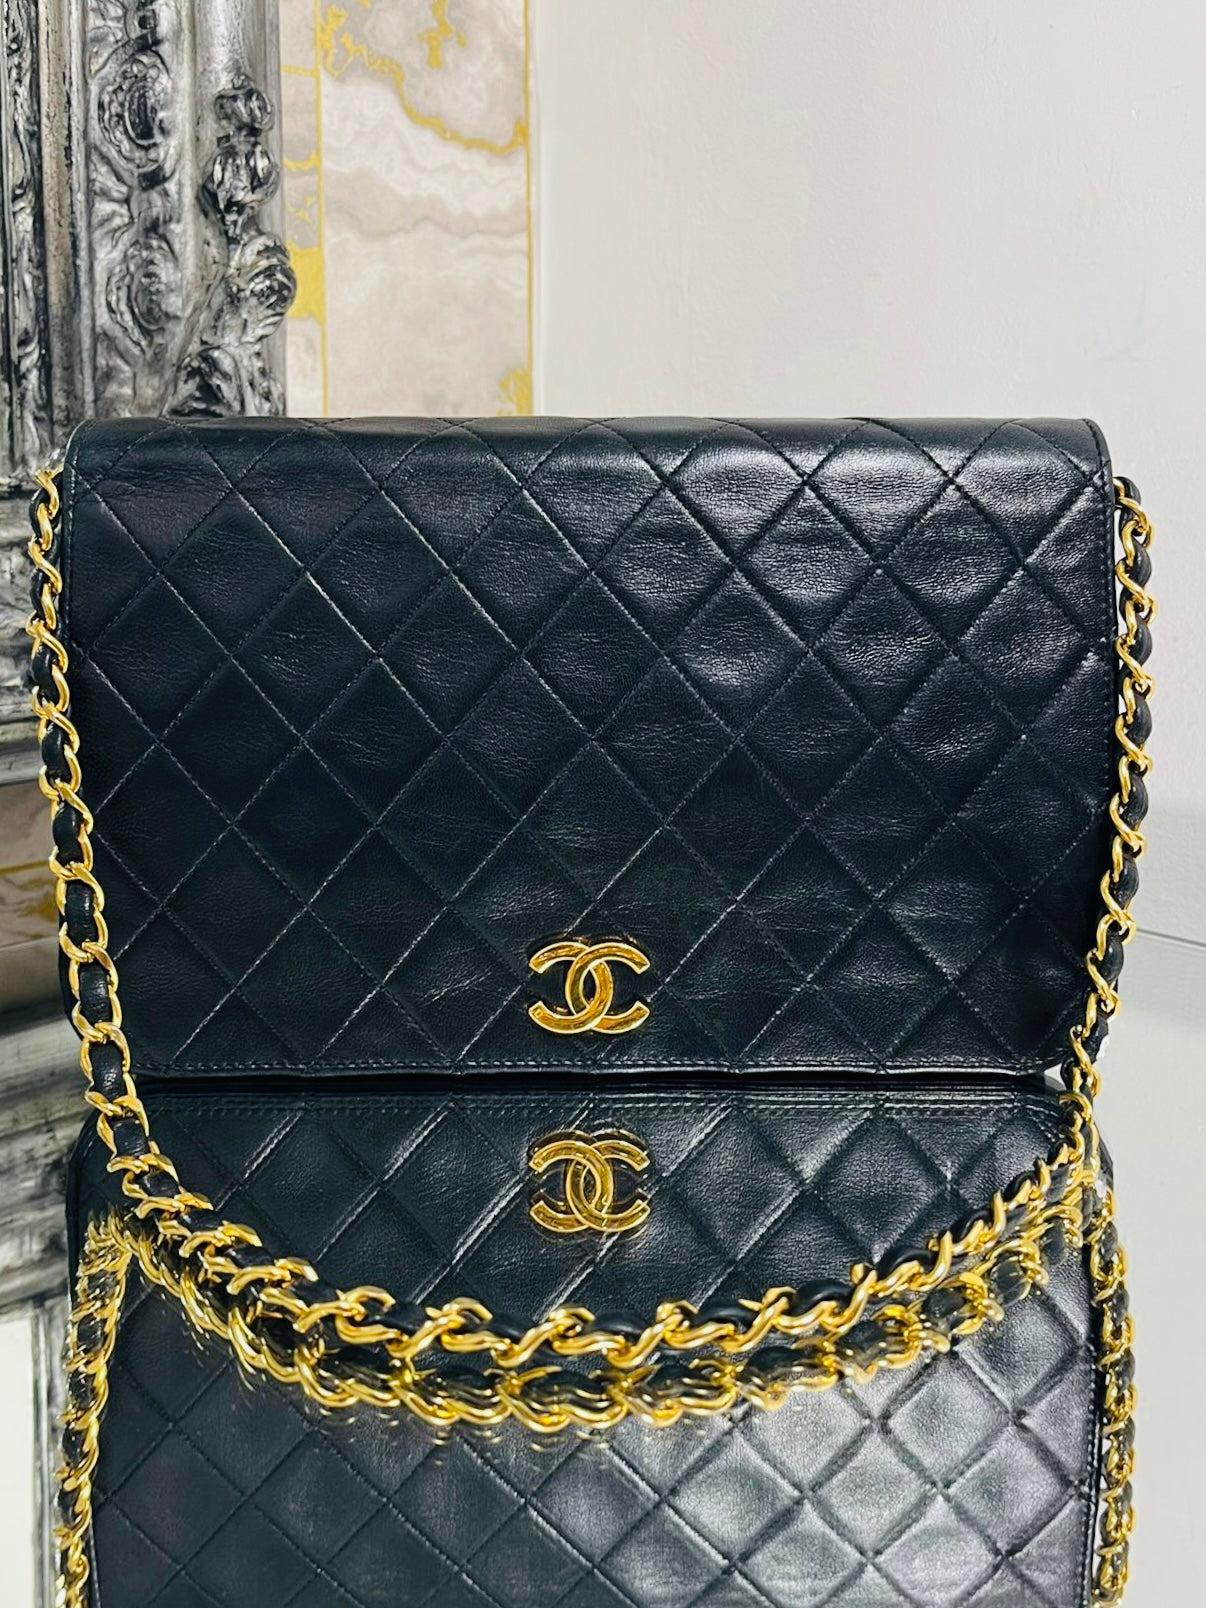 Chanel Vintage Timeless Single Flap Bag

Black diamond stich leather with 24k gold plated hardware. 'CC' logo and a single chain and leather shoulder strap. Burgundy leather interior. From approx 1980's. No serial code due to age.

Additional